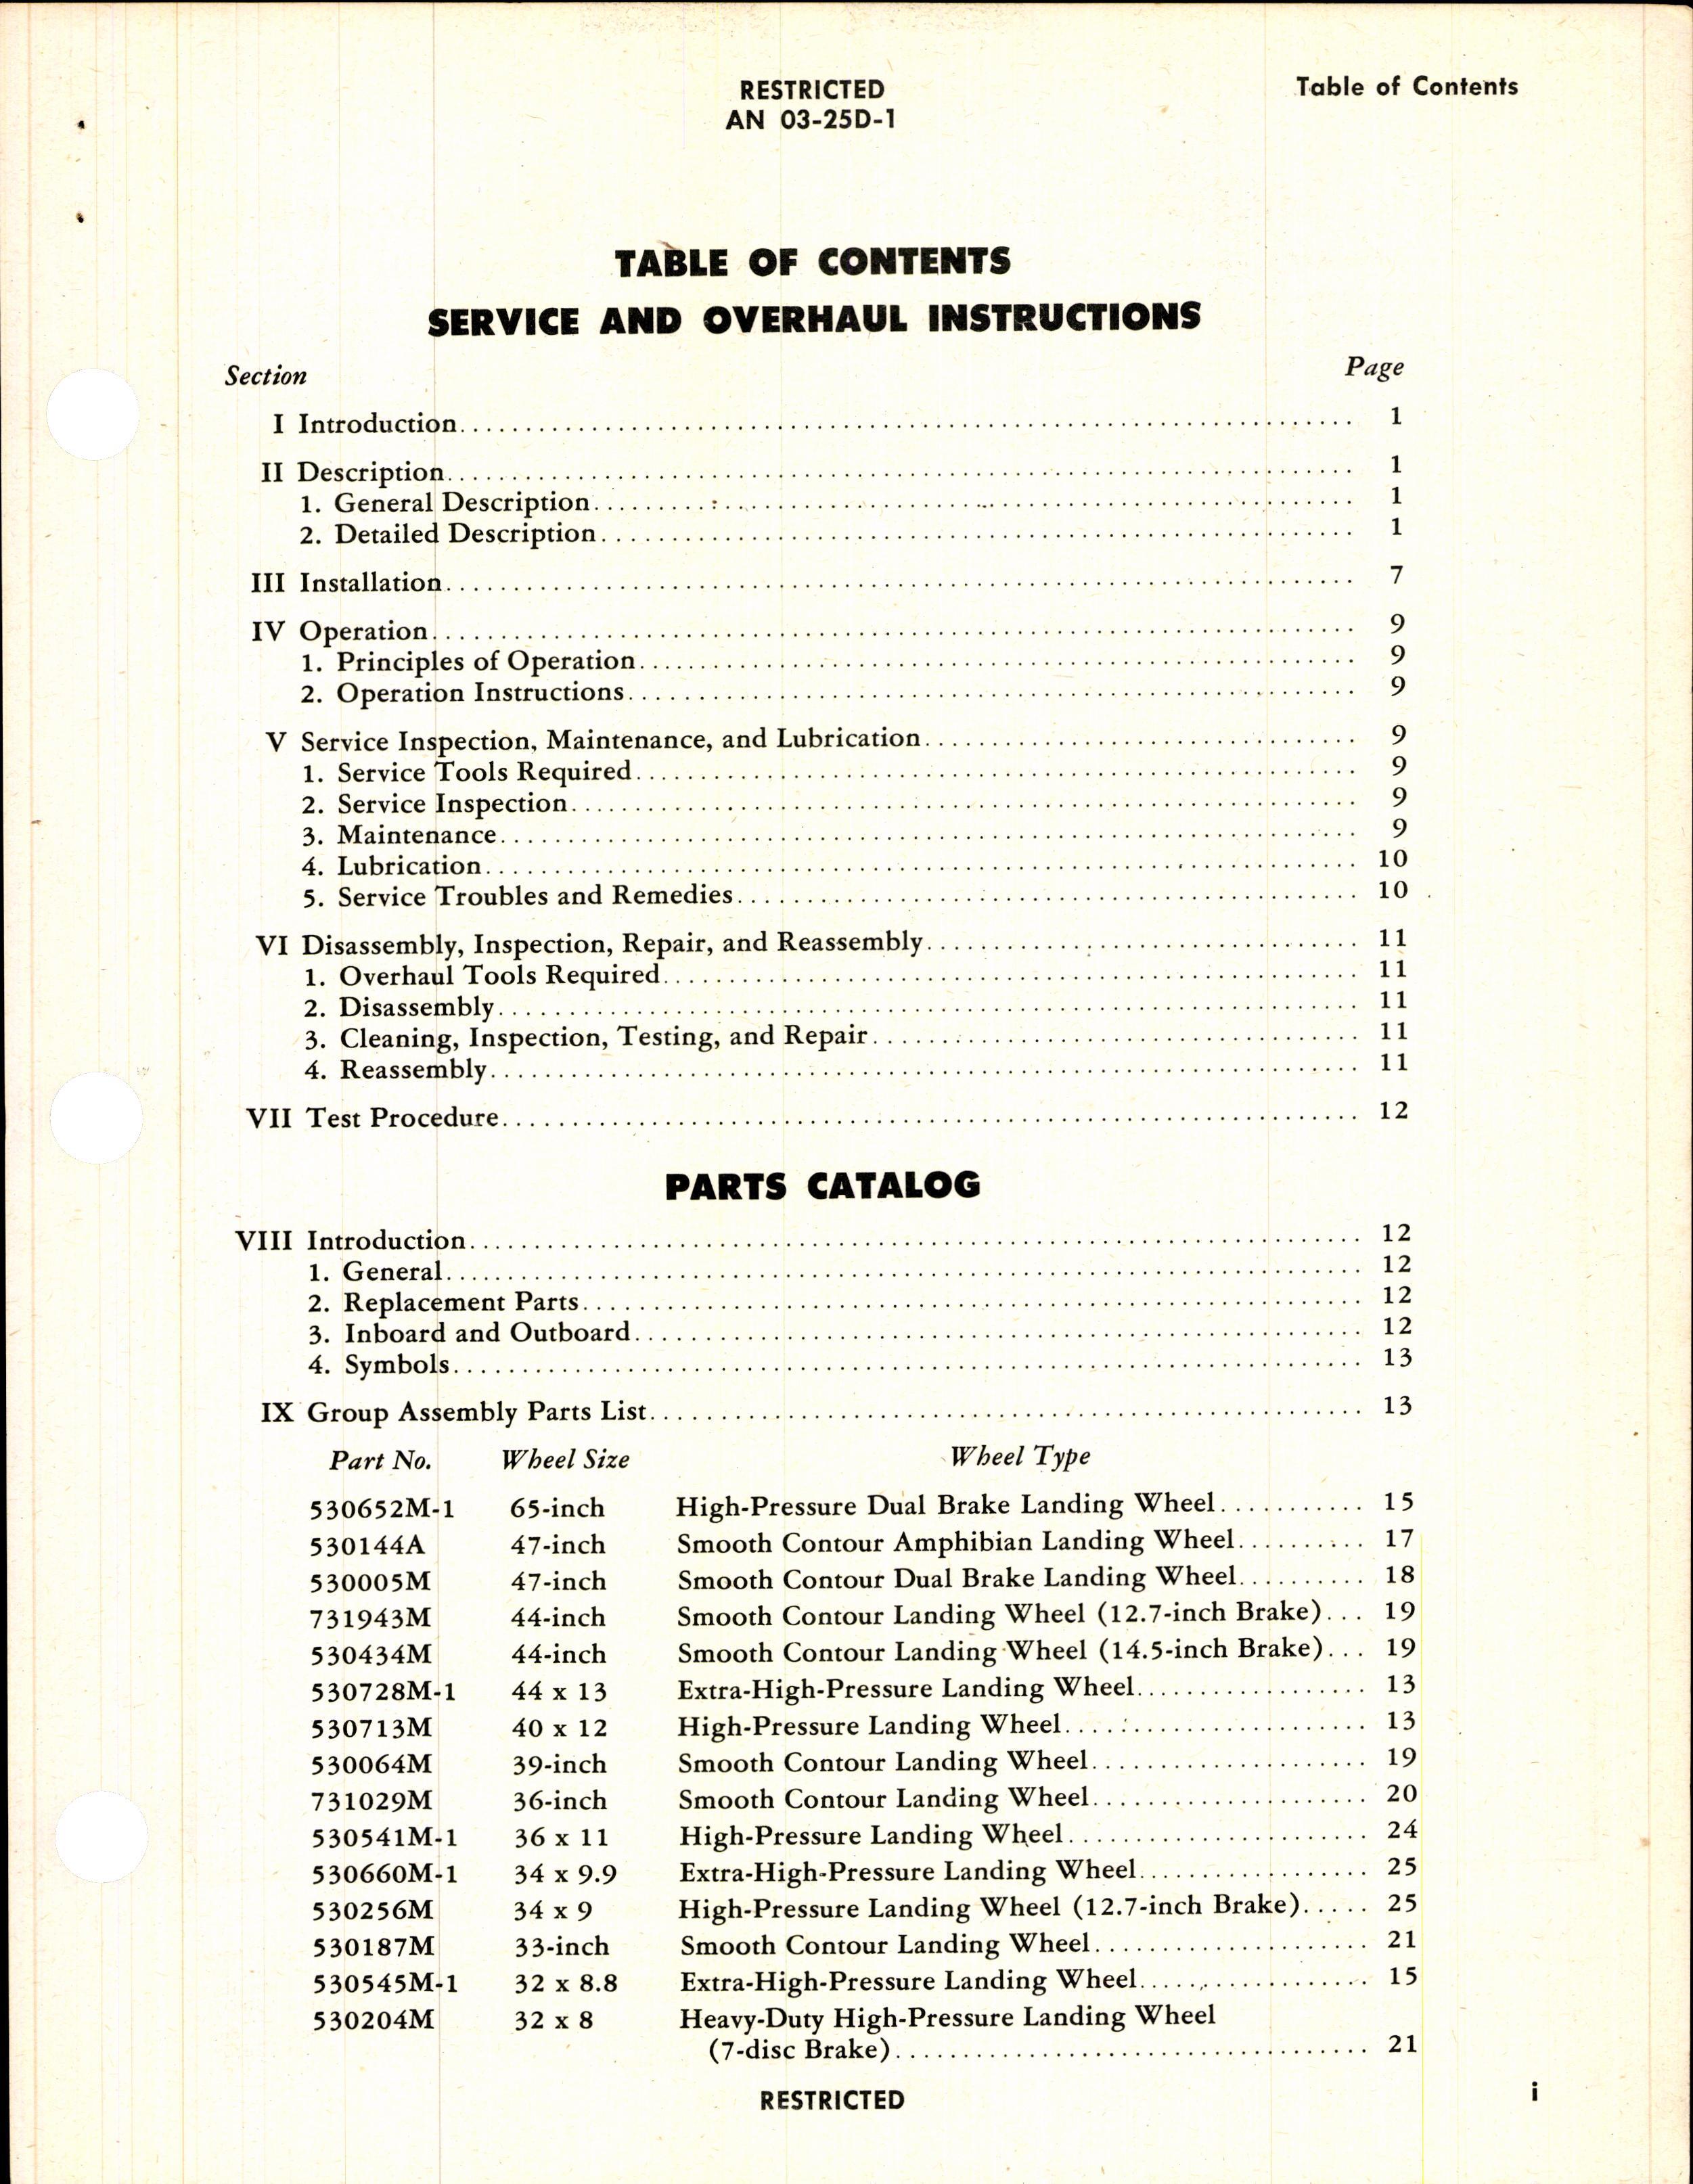 Sample page 3 from AirCorps Library document: Operation, Service, & Overhaul Instructions with Parts Catalog for Landing Wheels For Use With Multiple Disc Brakes